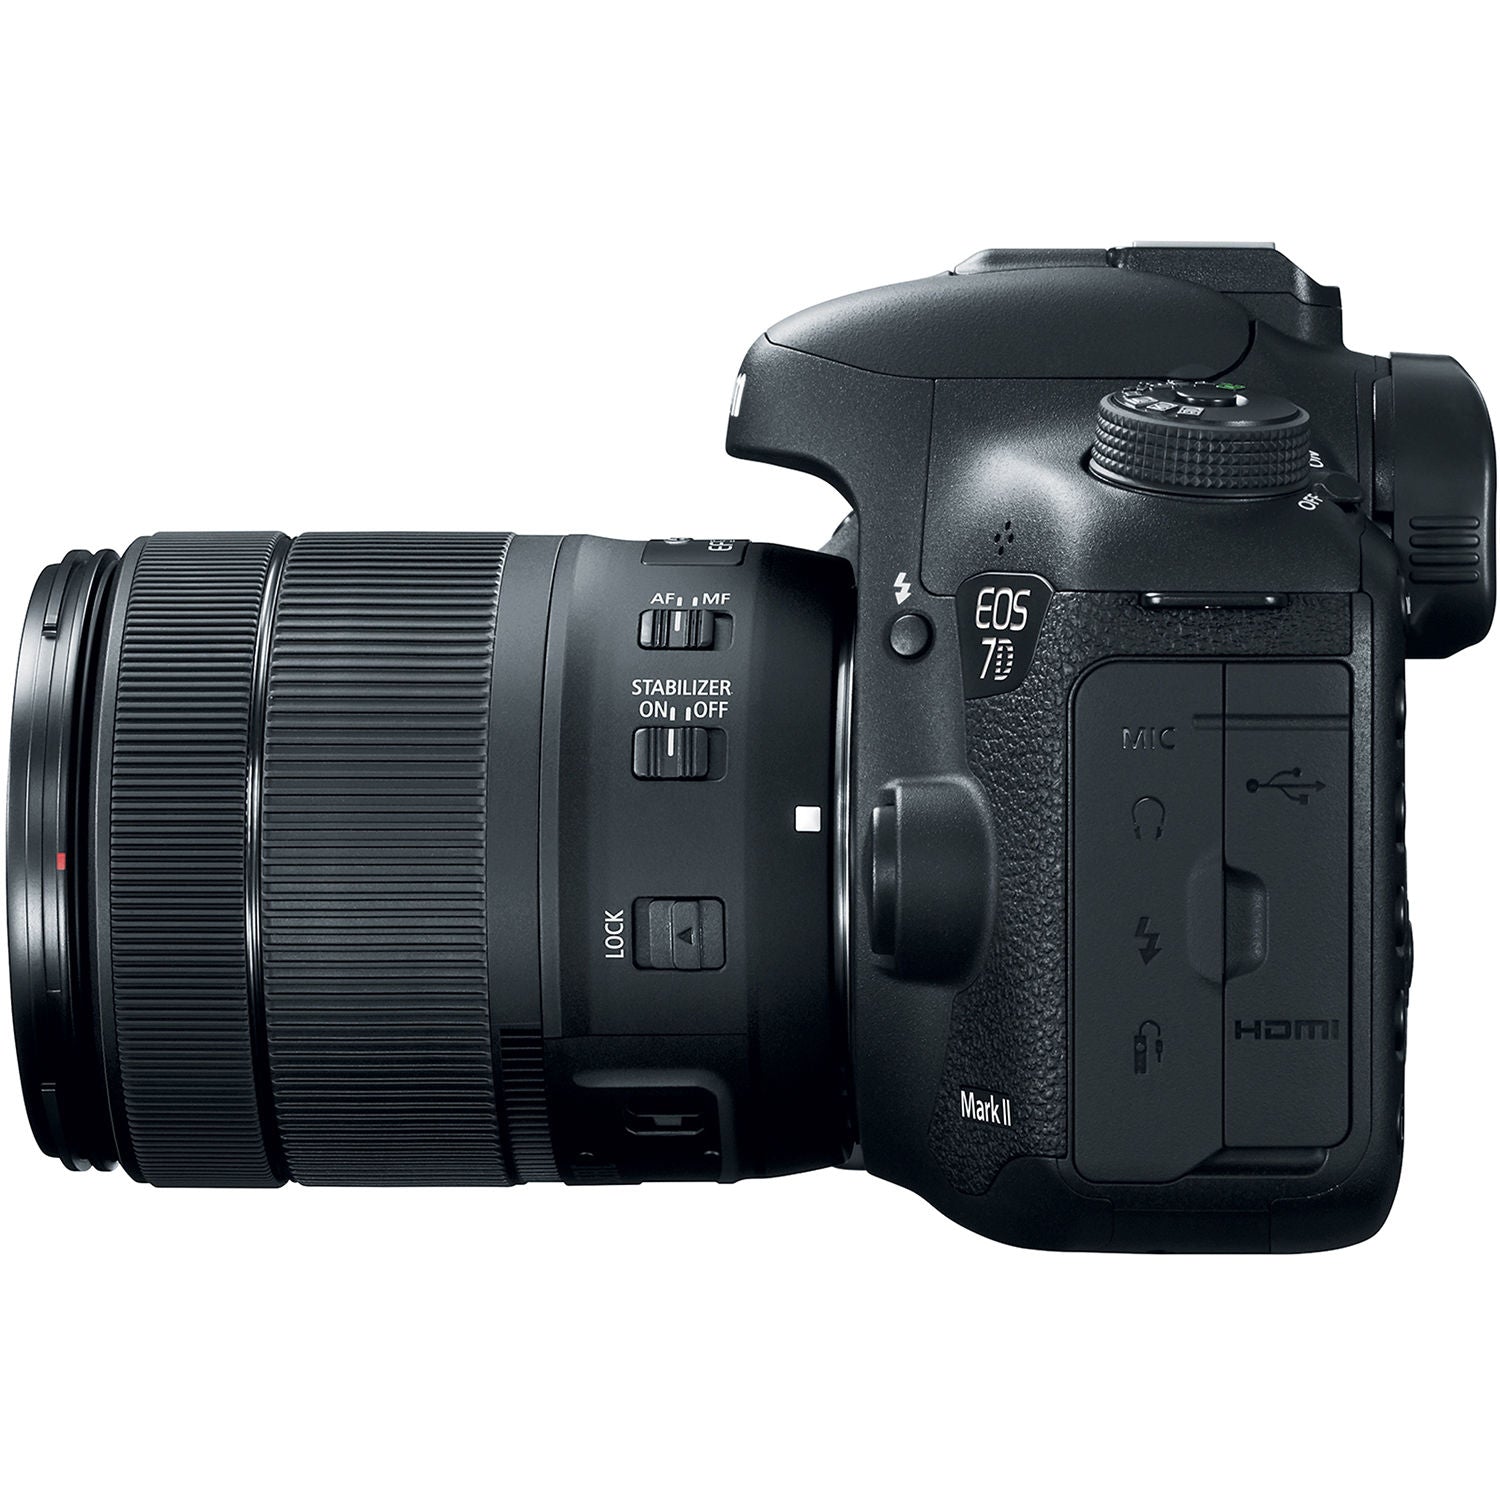 Canon EOS 7D Mark II DSLR Camera (Intl Model) w/ 18-135mm Lens & W-E1 Wi-Fi Adapter With Memory Card Kit, Filter Kit